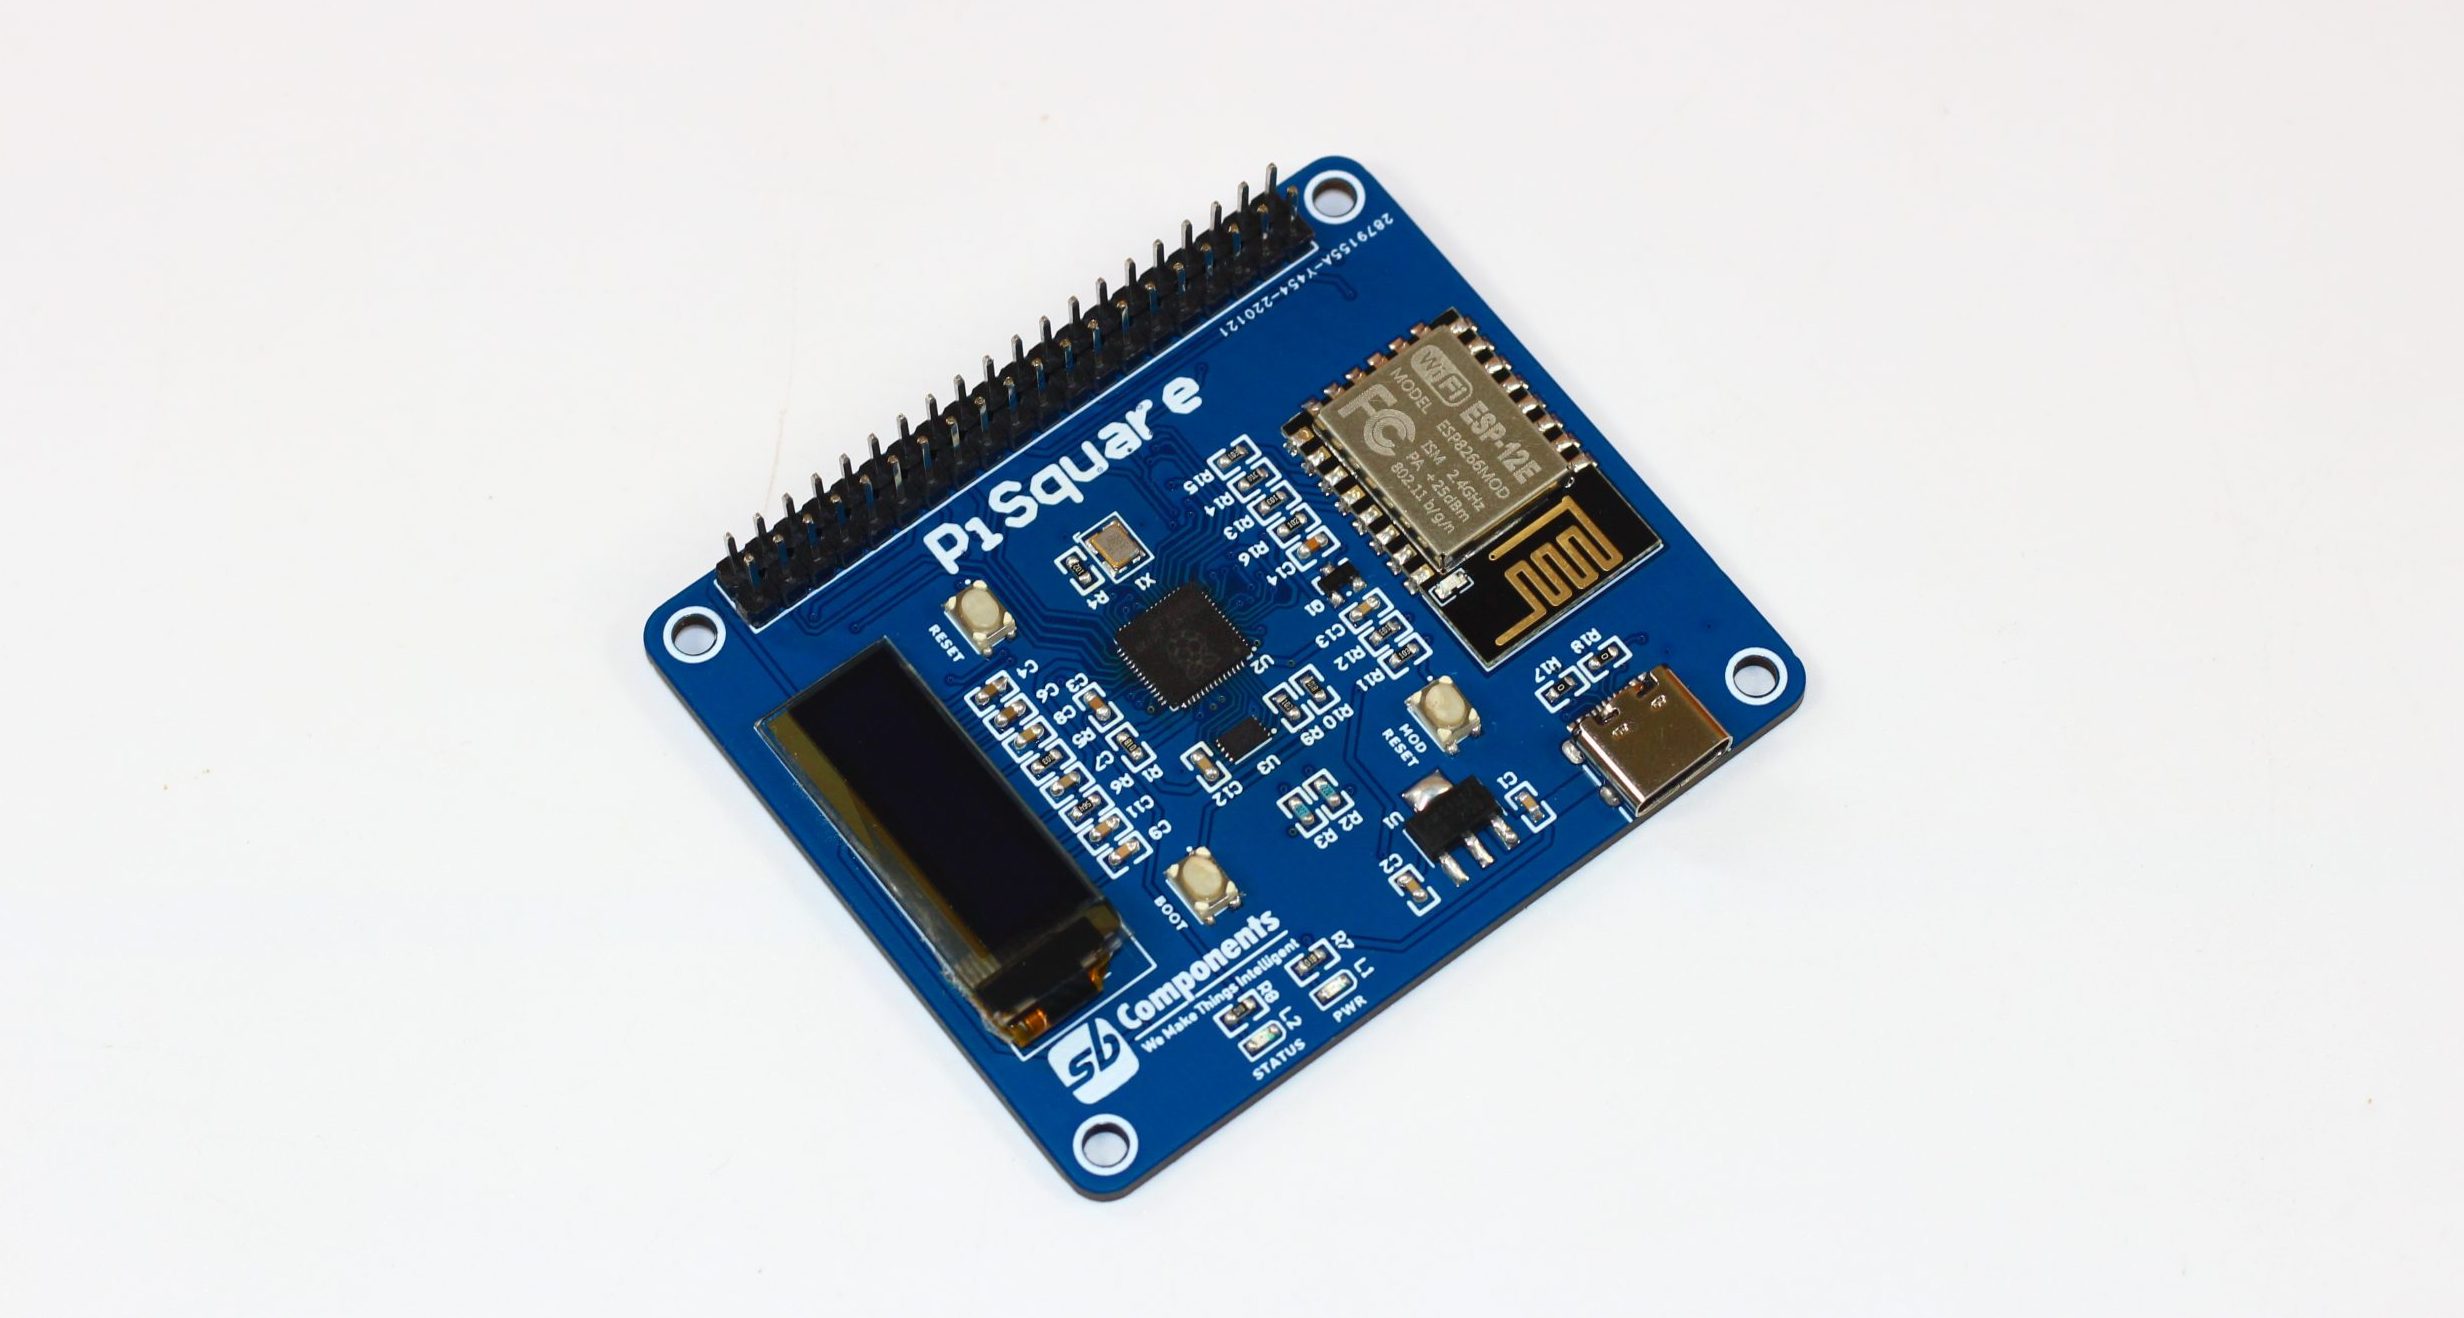 PiSquare Introduction – an RP2040 & ESP-12E based board